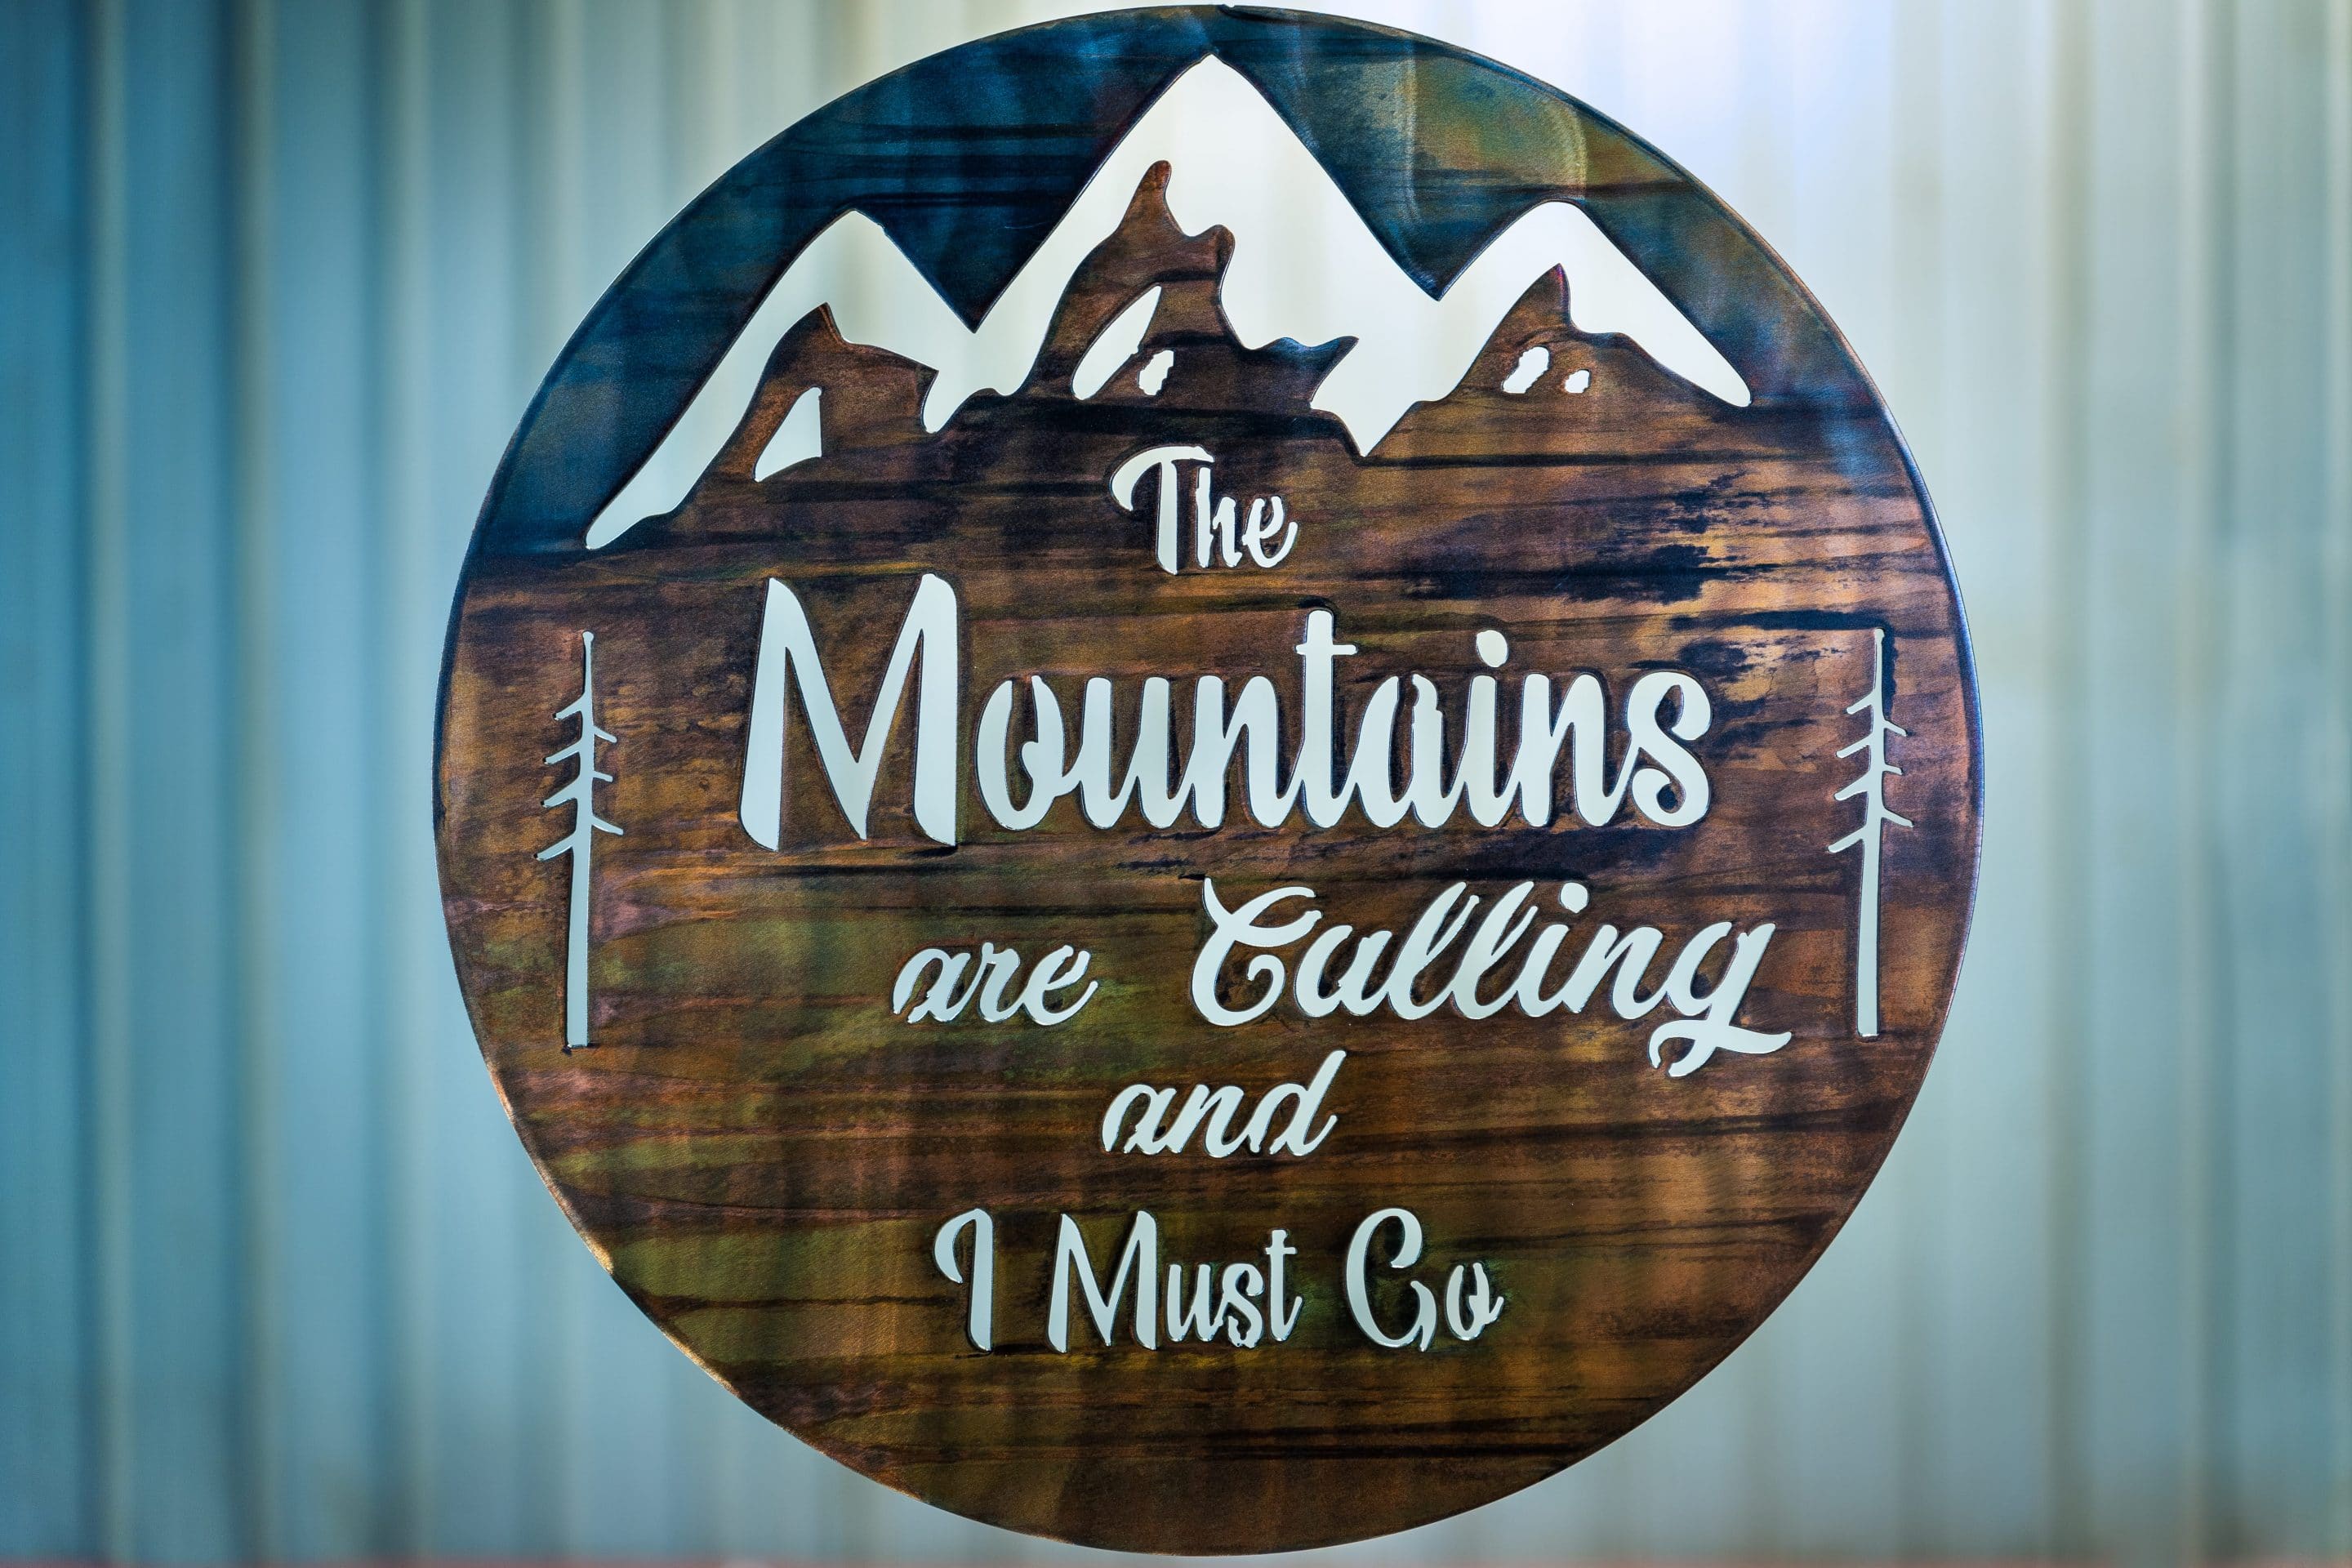 The Mountains are Calling and I Must Go Metal Wall Art Decor Wall Hanging 16" 